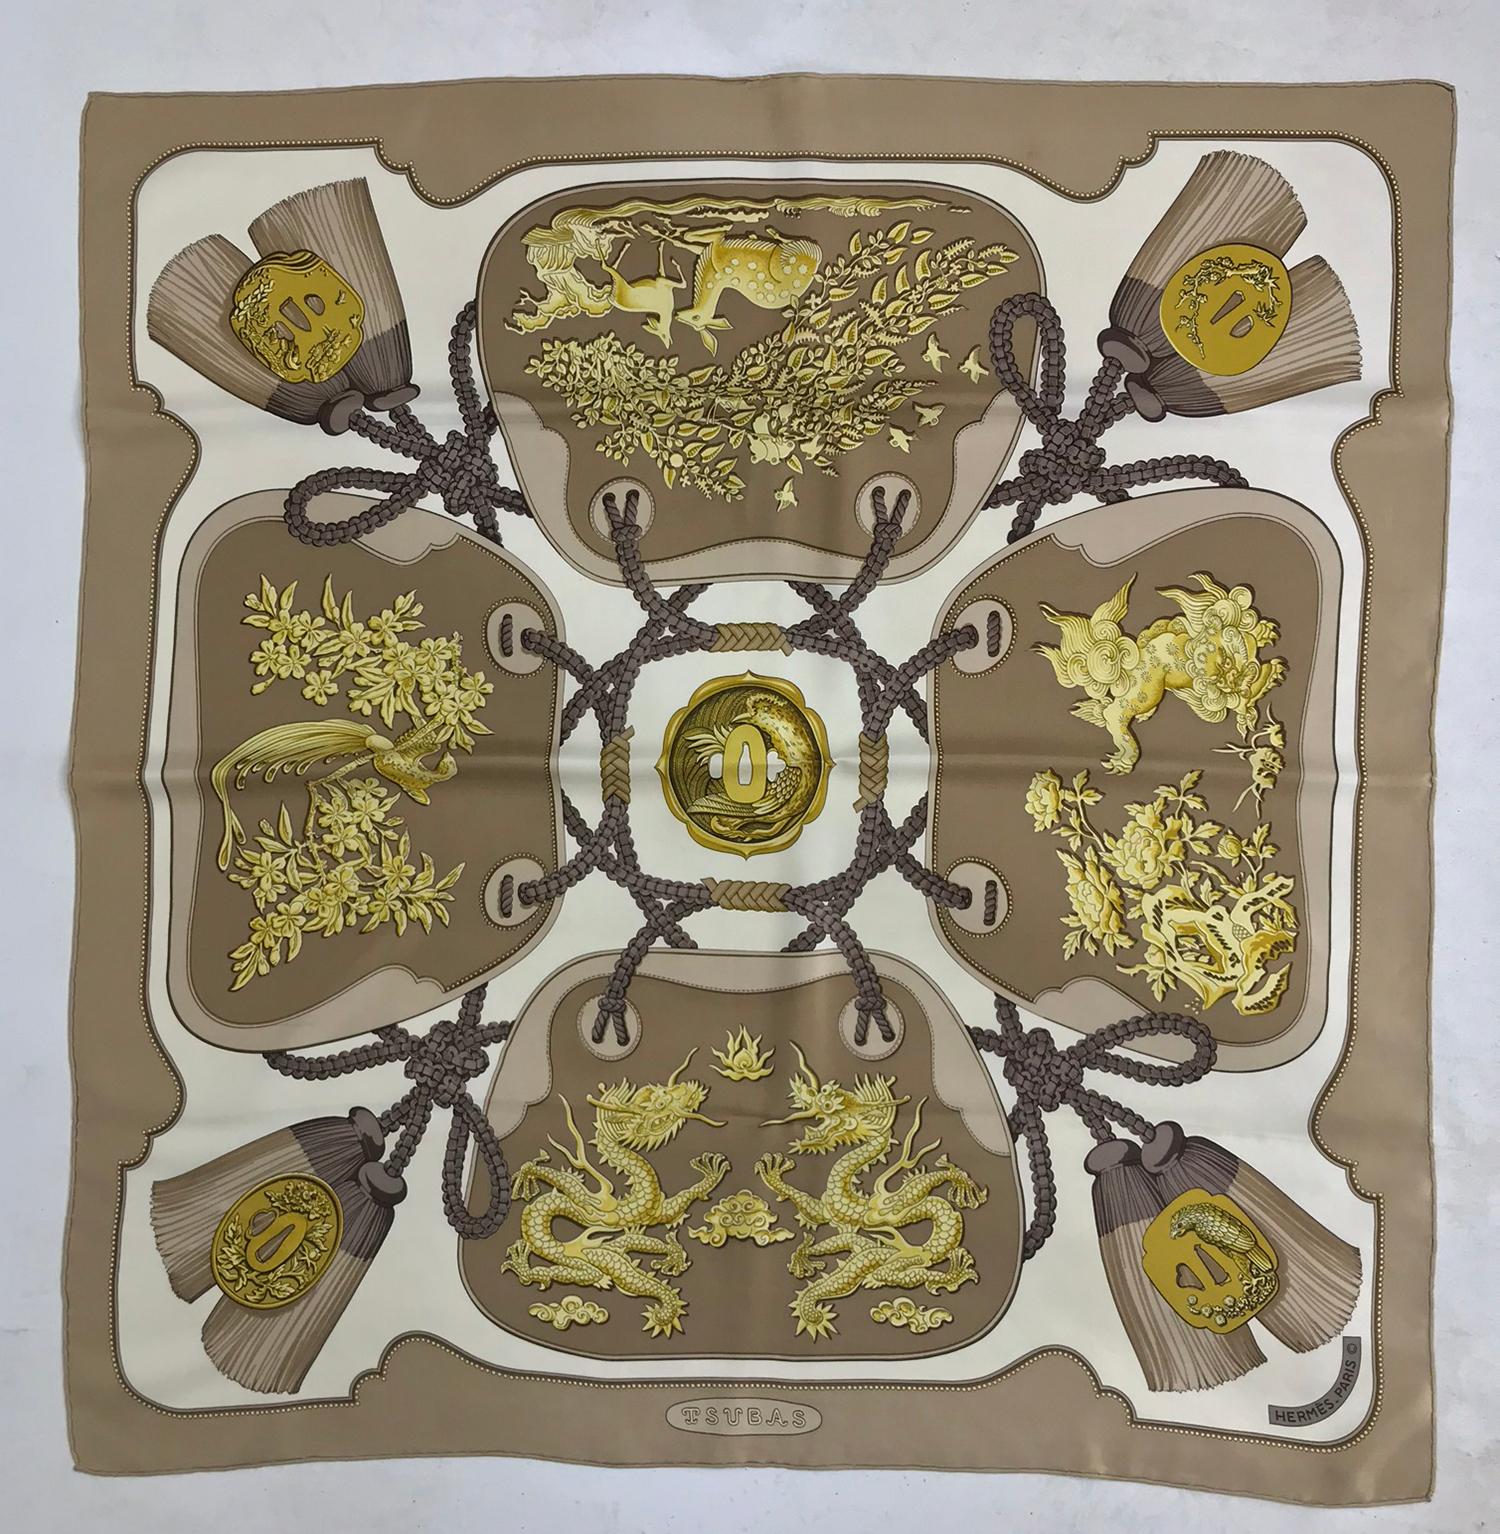 Hermes Tsubas Silk Twill Scarf  Designed by Christiane Vauzelles 35 x 35. Beautiful scarf in tan, gold and cream.
A couple of light marks that are hard to find, this scarf has been professionally dry cleaned.